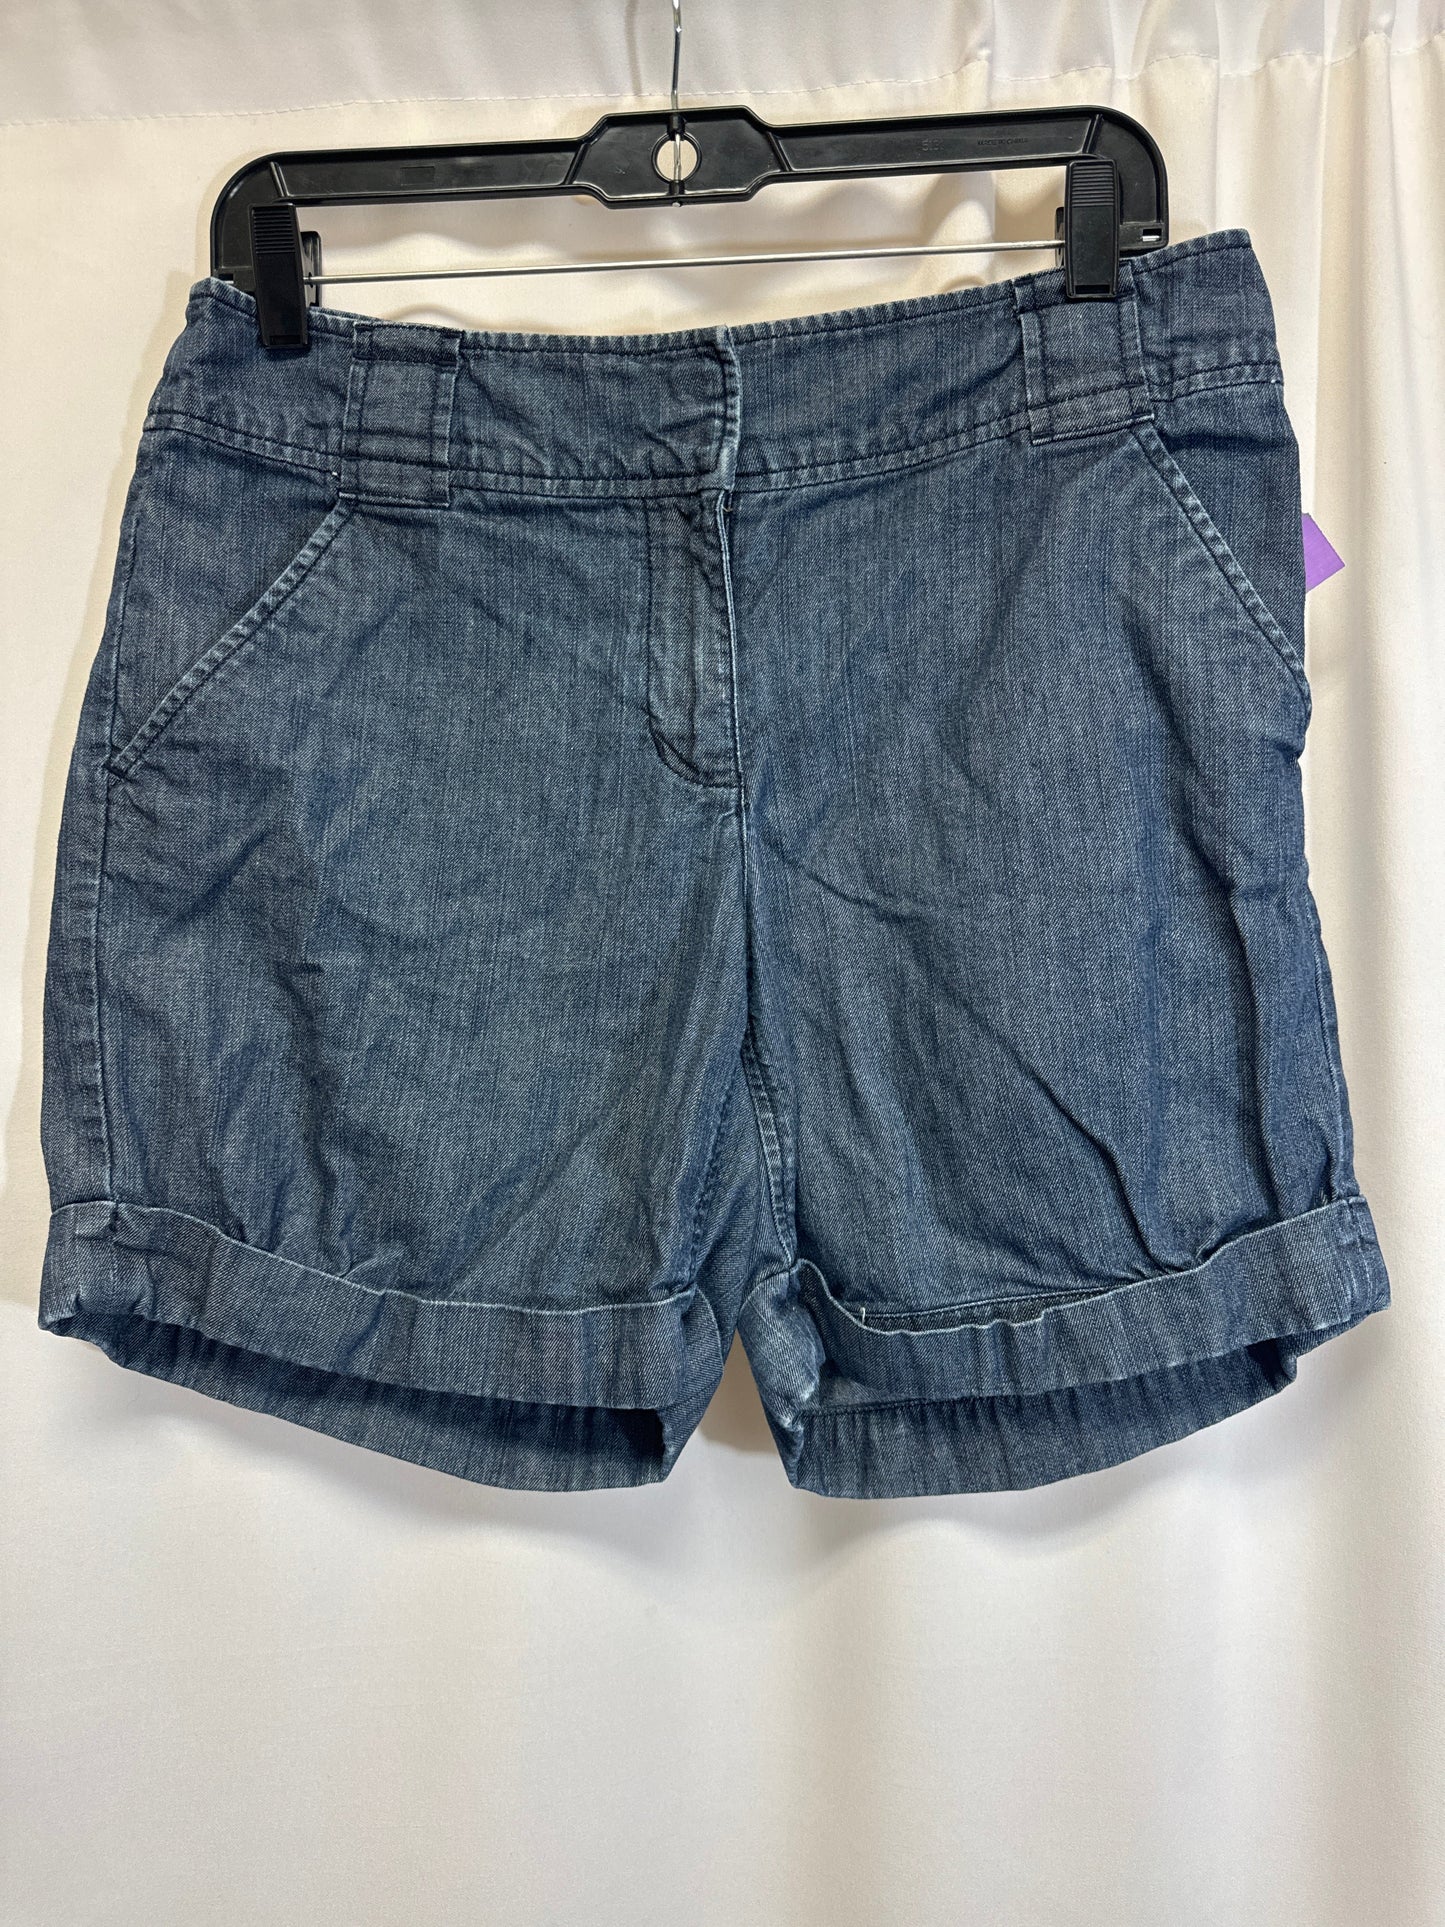 Blue Shorts New York And Co, Size 8